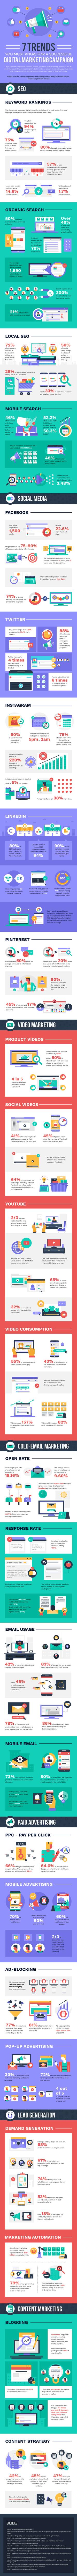 (Infographic) 7 Trends You Must Know For A Successful Digital Marketing Campaign 1